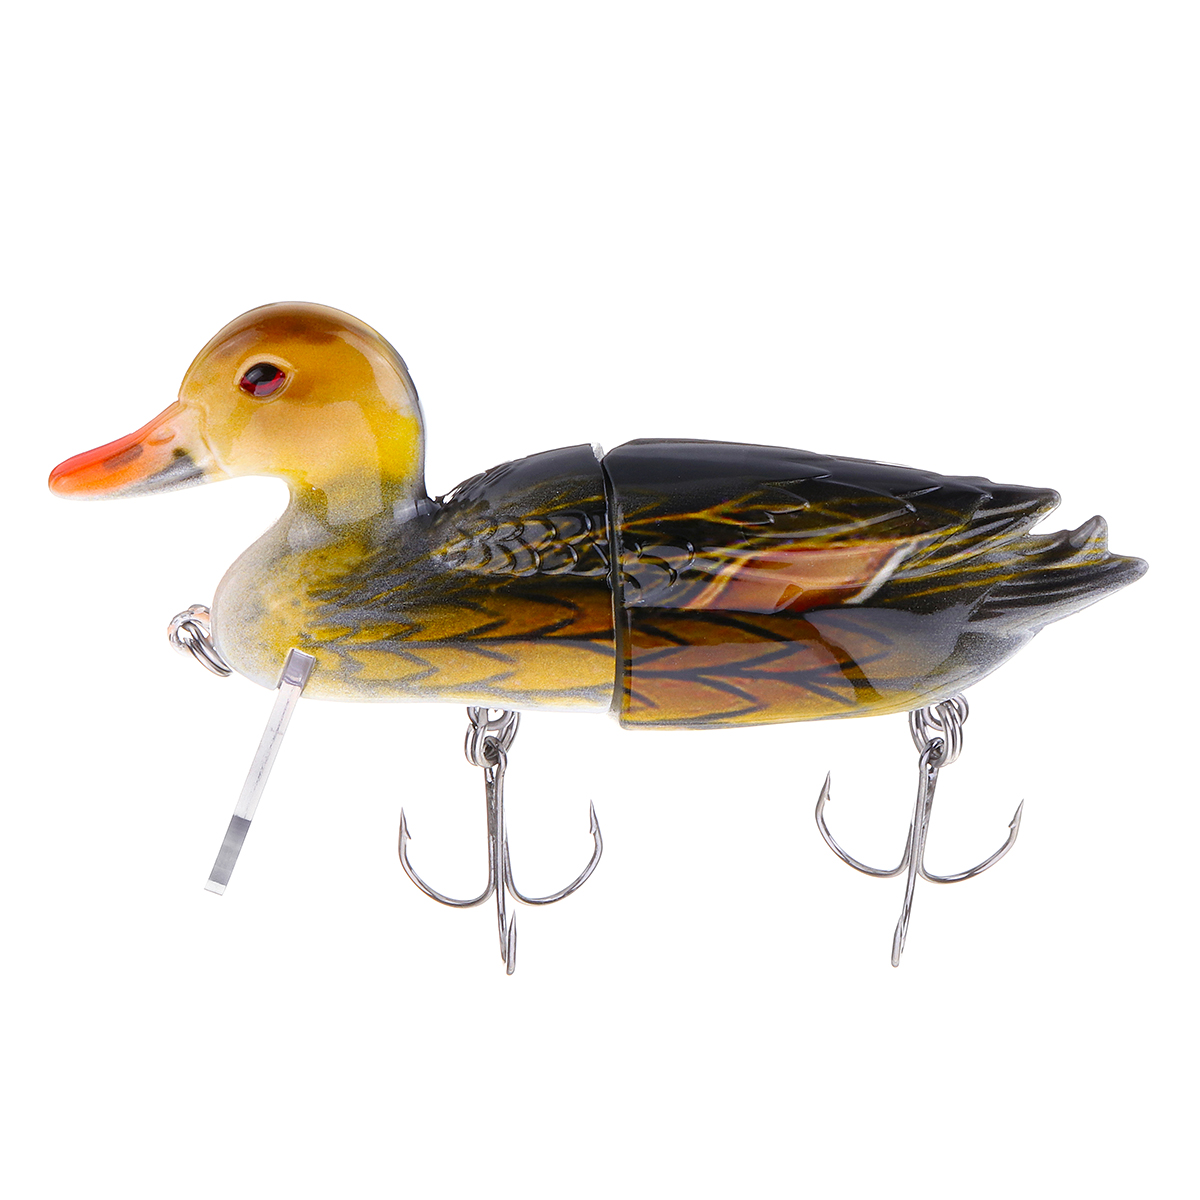 1PC-ZANLURE-6-15CM-140g-3D-Duck-Fishing-Lure-With-Hooks-Crankbait-Jointed-Hard-Baits-Minnow-Topwater-1646052-9